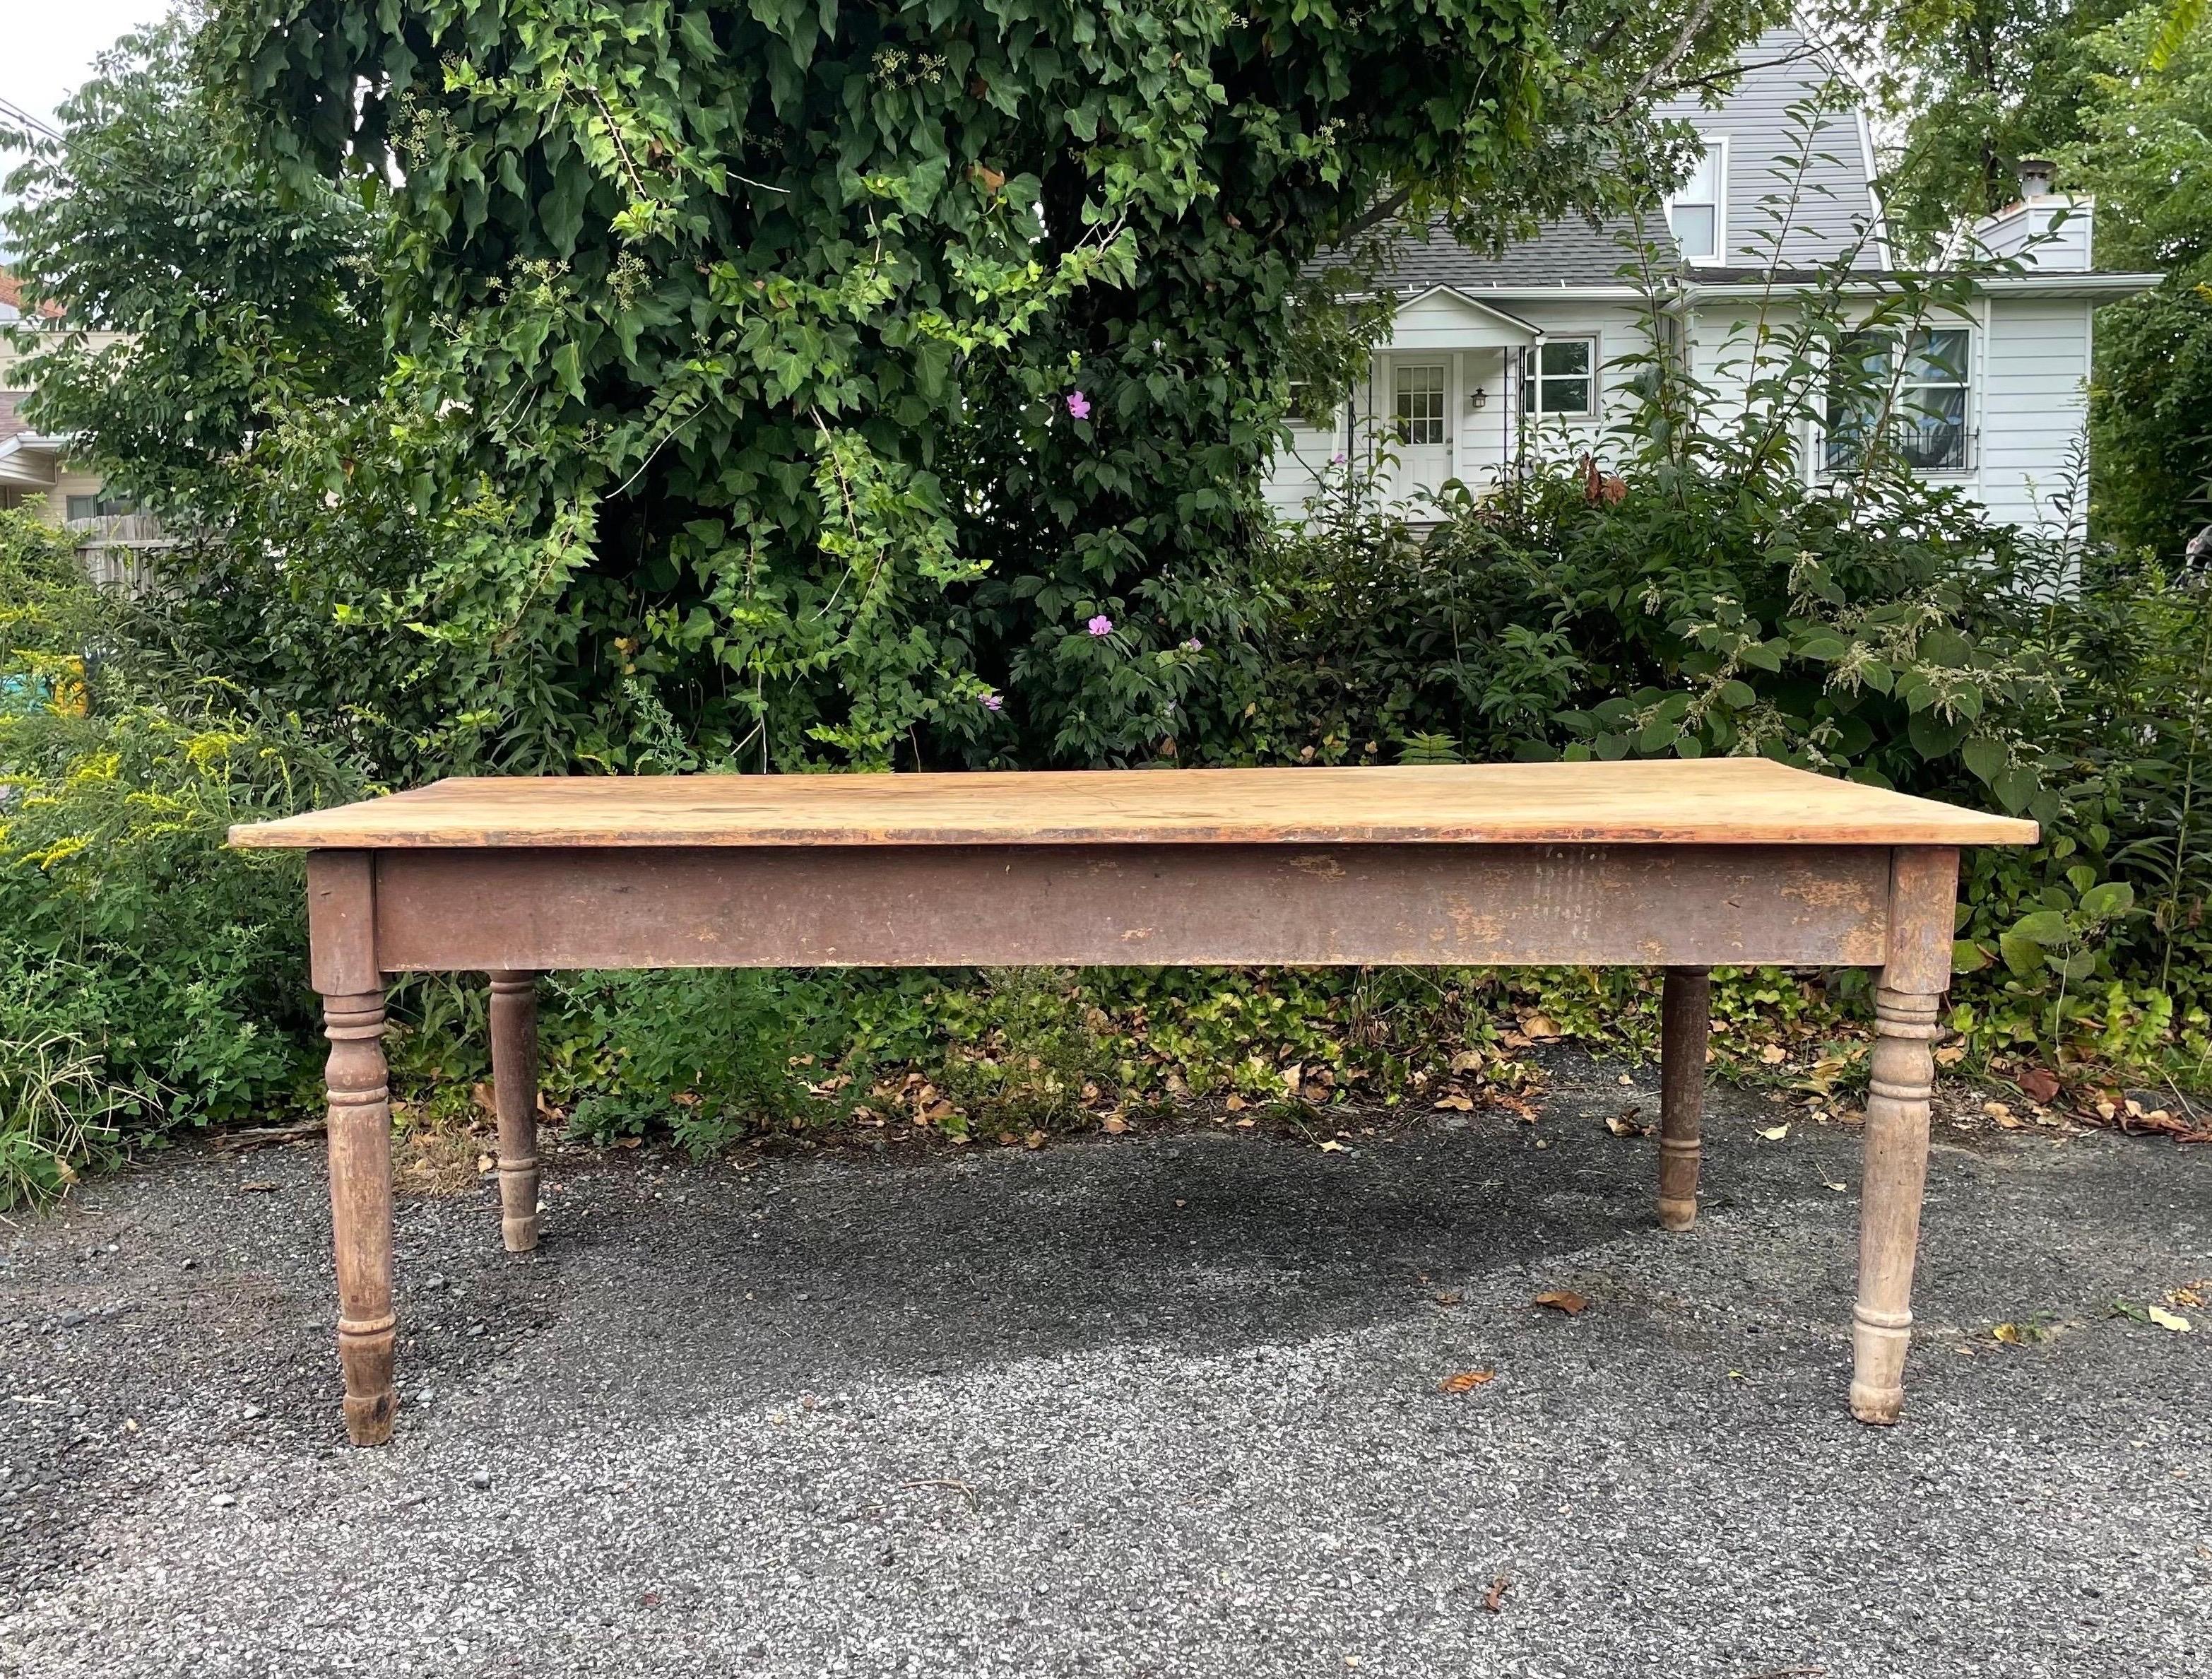 A primitive harvest or dining table made of old growth pine with tons of character and the widest boards I've ever seen (Imagine the size of that tree). Comfortably seats 8. Most likely from the early to mid 1800s.